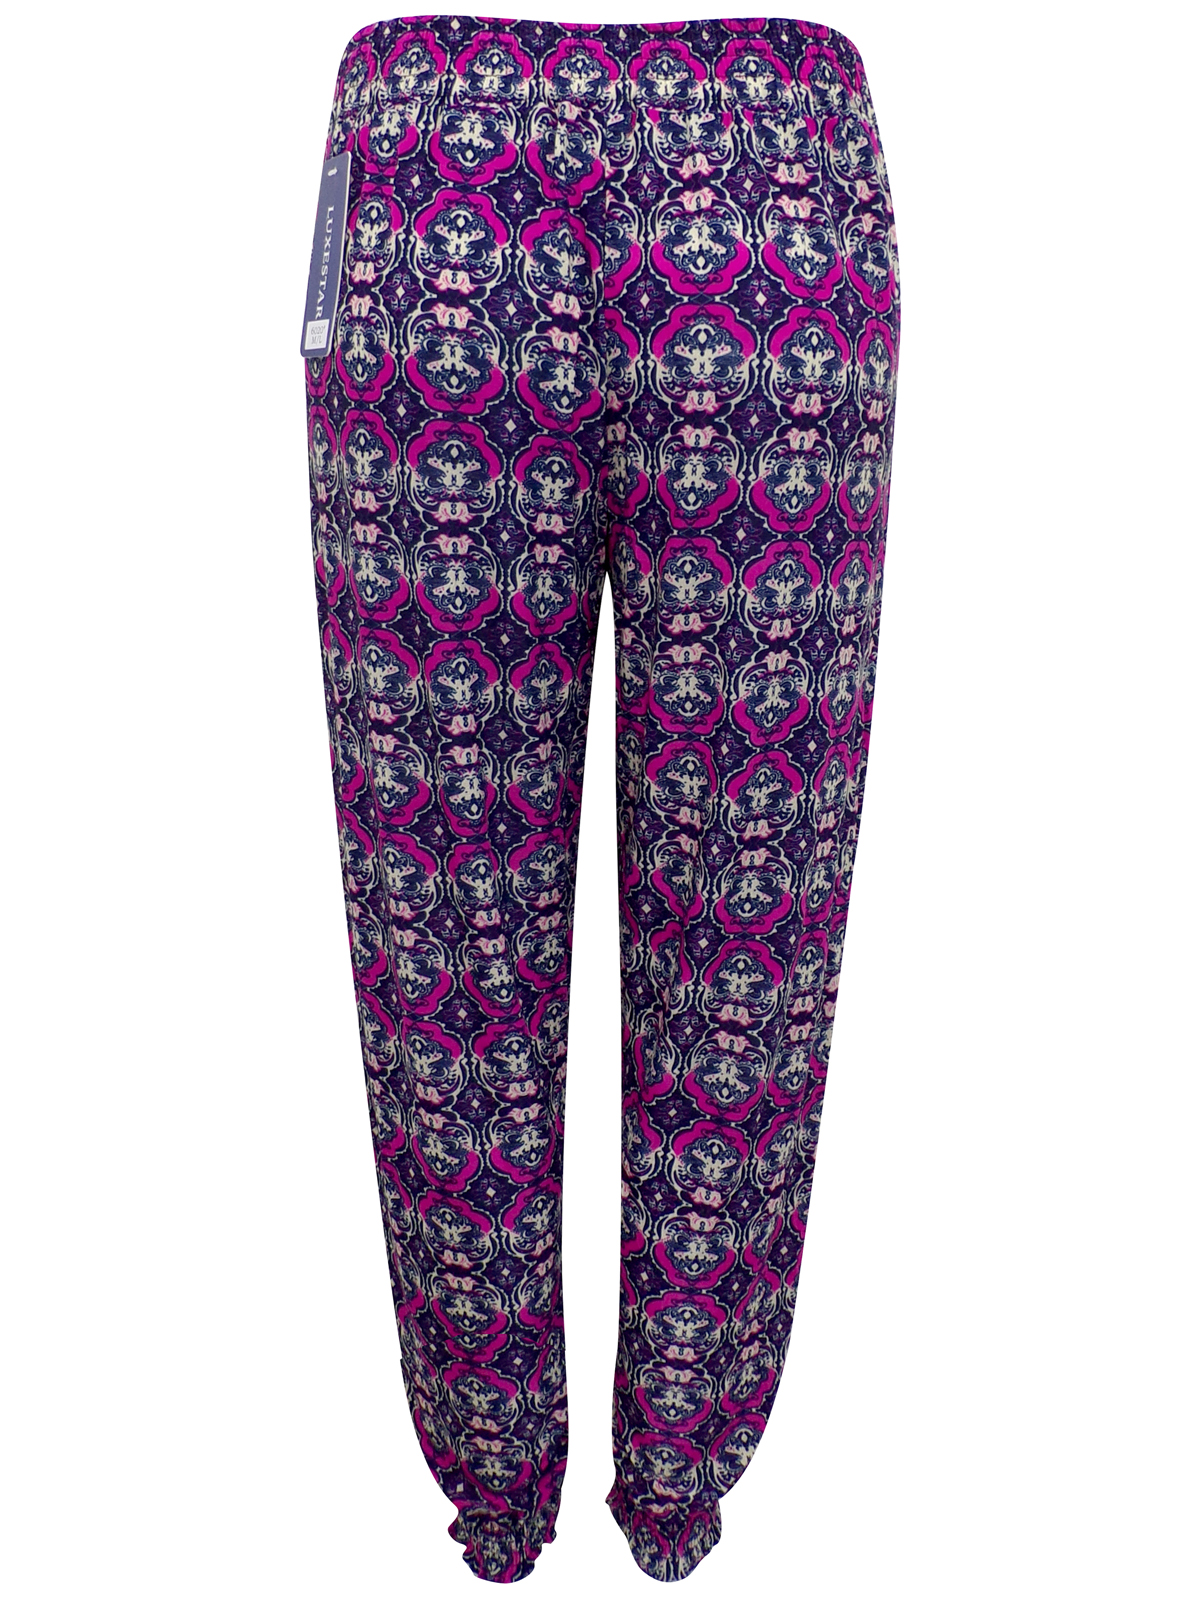 Luxestar - - Luxestar PURPLE Pull On Printed Harem Trousers - Size 12/ ...